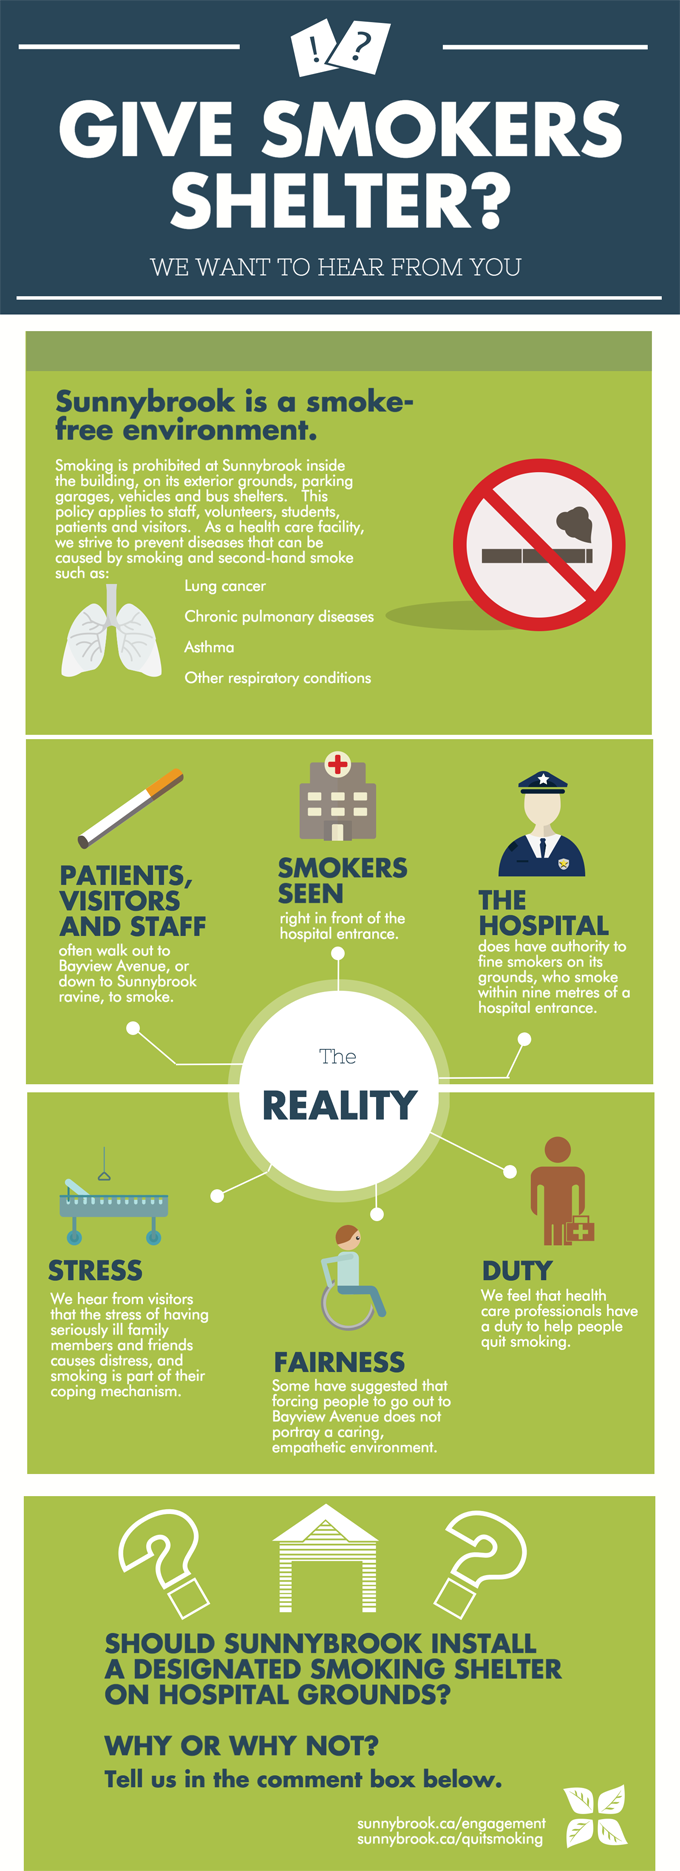 Give Smokers Shelter infographic. Accessible text follows